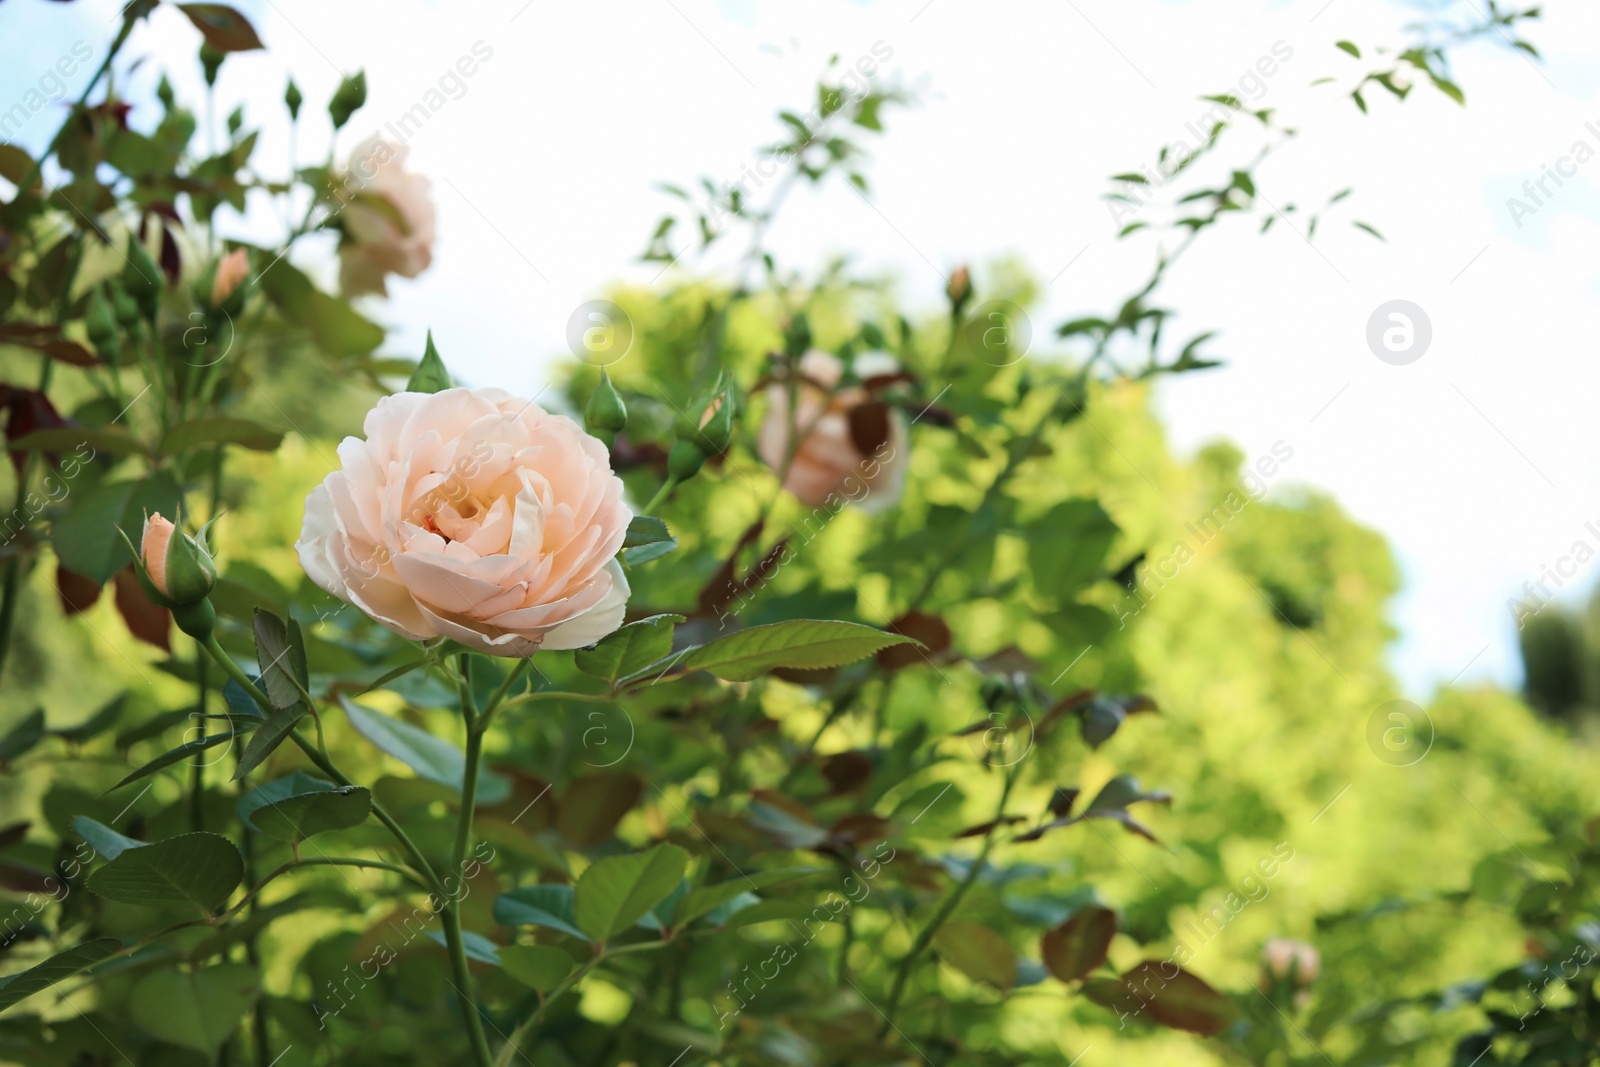 Photo of Bush with beautiful blooming rose in garden